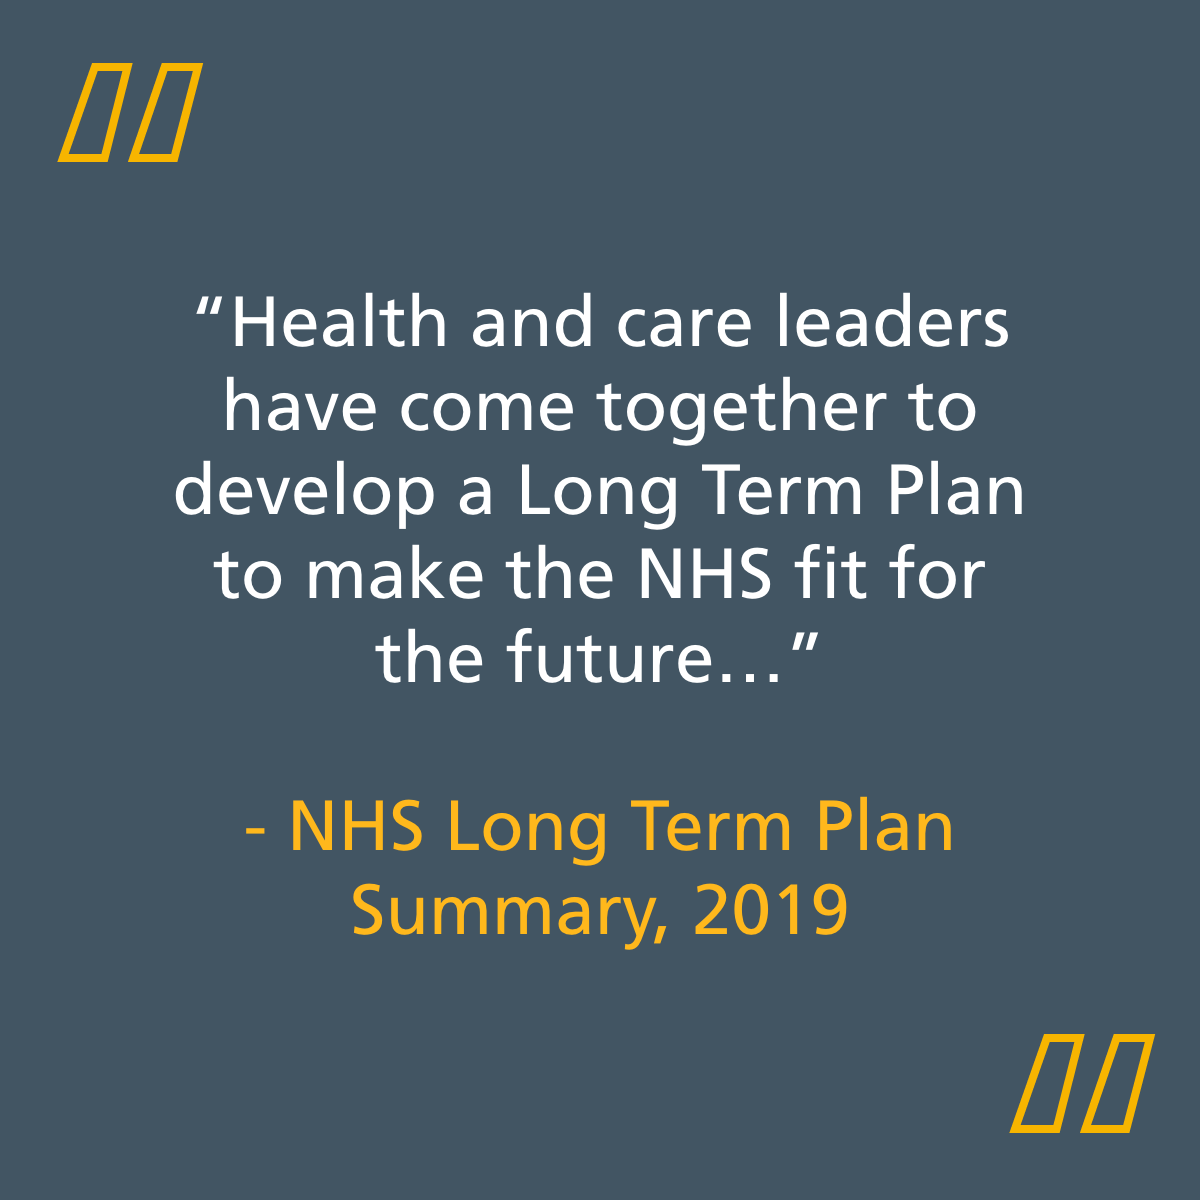 "Health and care leaders have come together to develop a Long Term Plan to make the NHS fit for the future..." - Quote from NHS Long Term Plan Summary